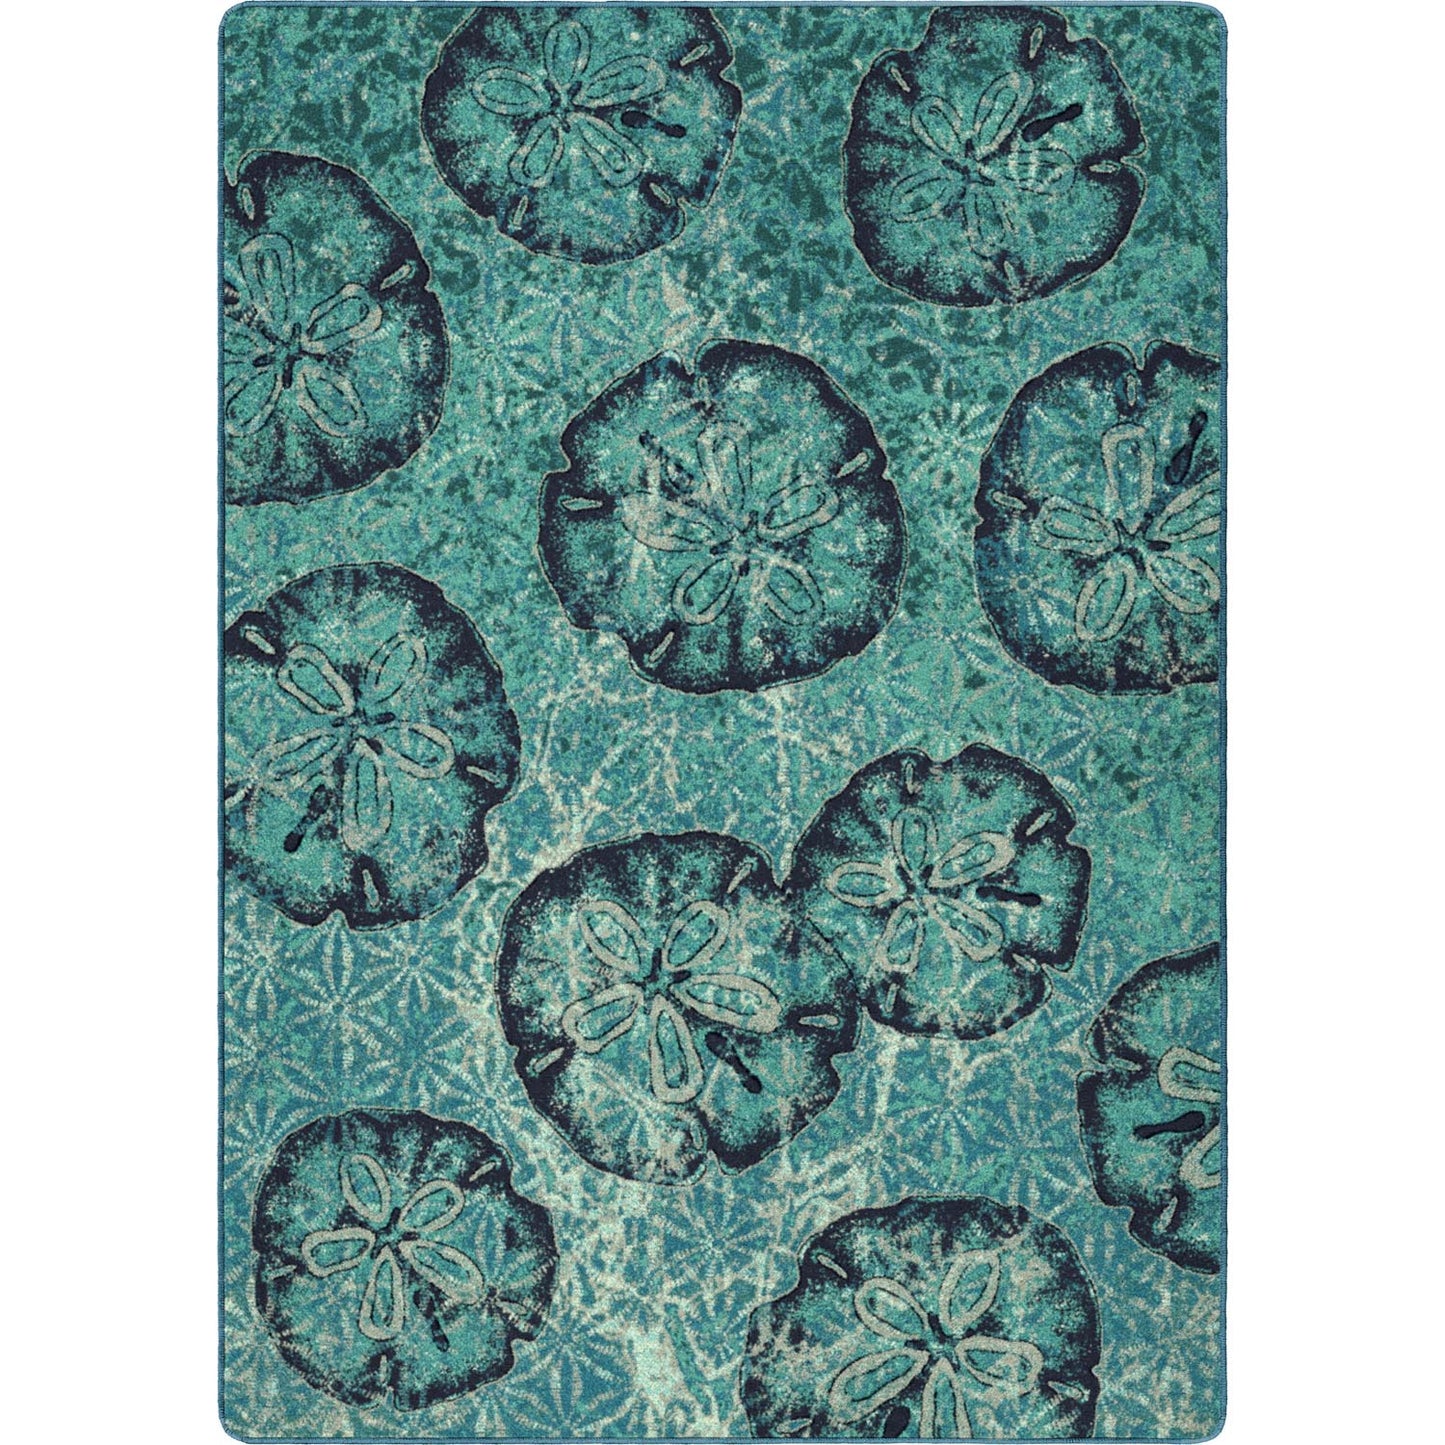 Coastal Bliss Rug - Evoking the tranquil hues of a beach sunset in your home